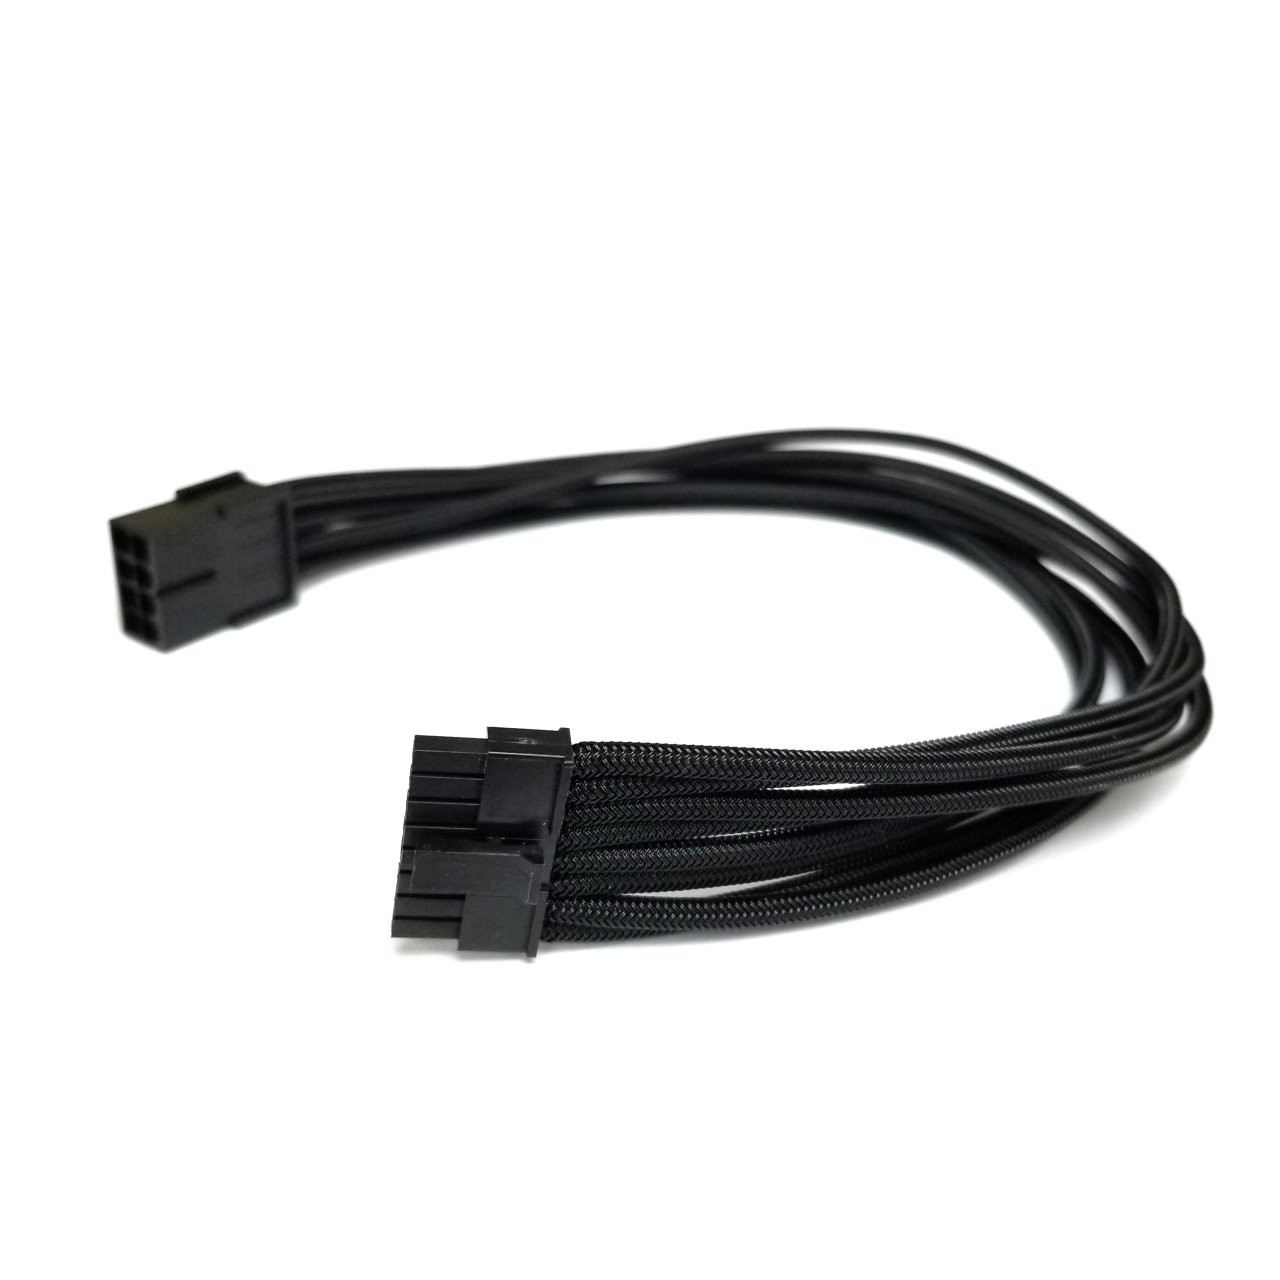 pcie 8 pin connector